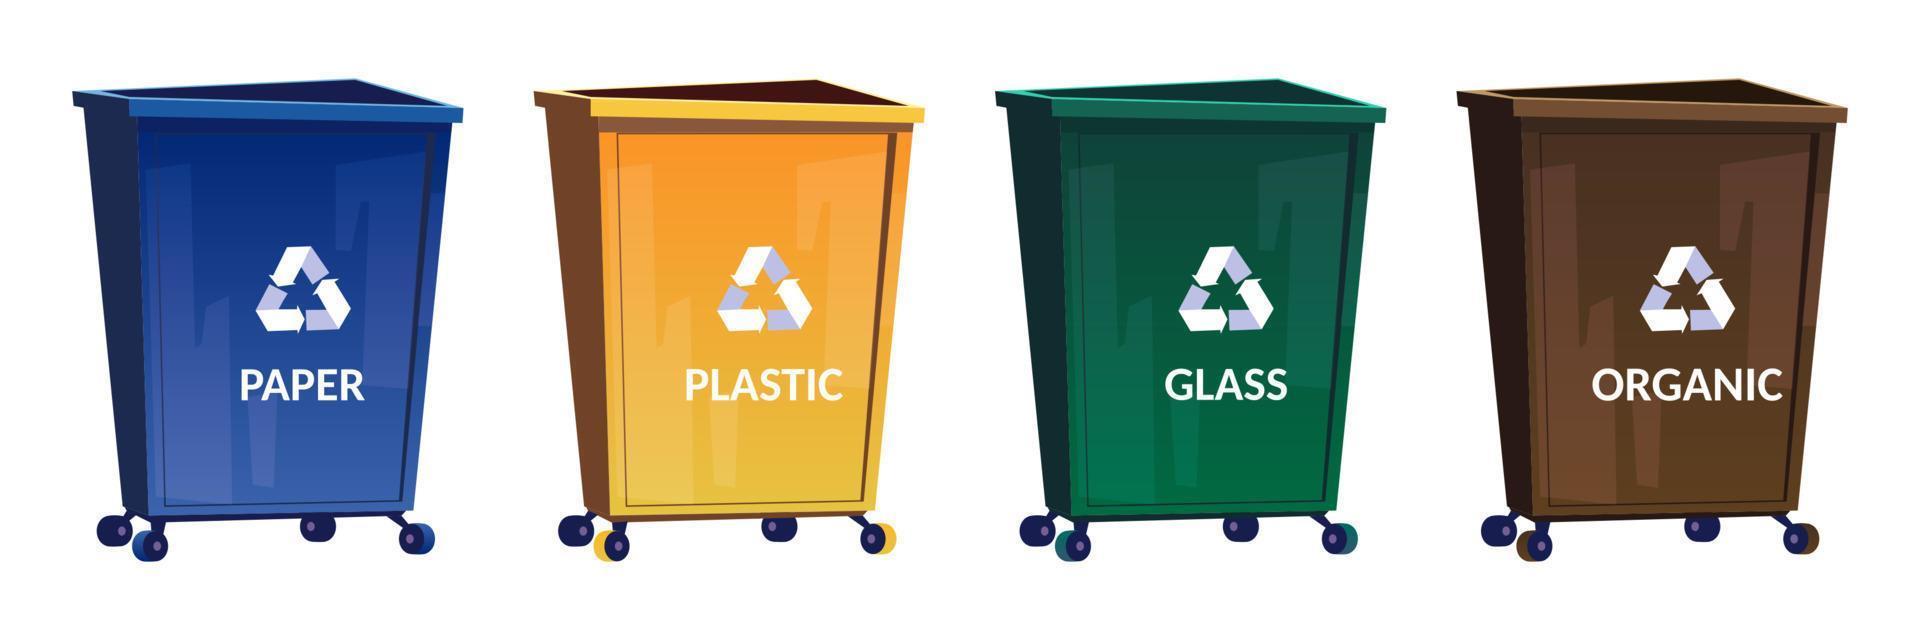 Trash bins for separate and recycle garbage vector